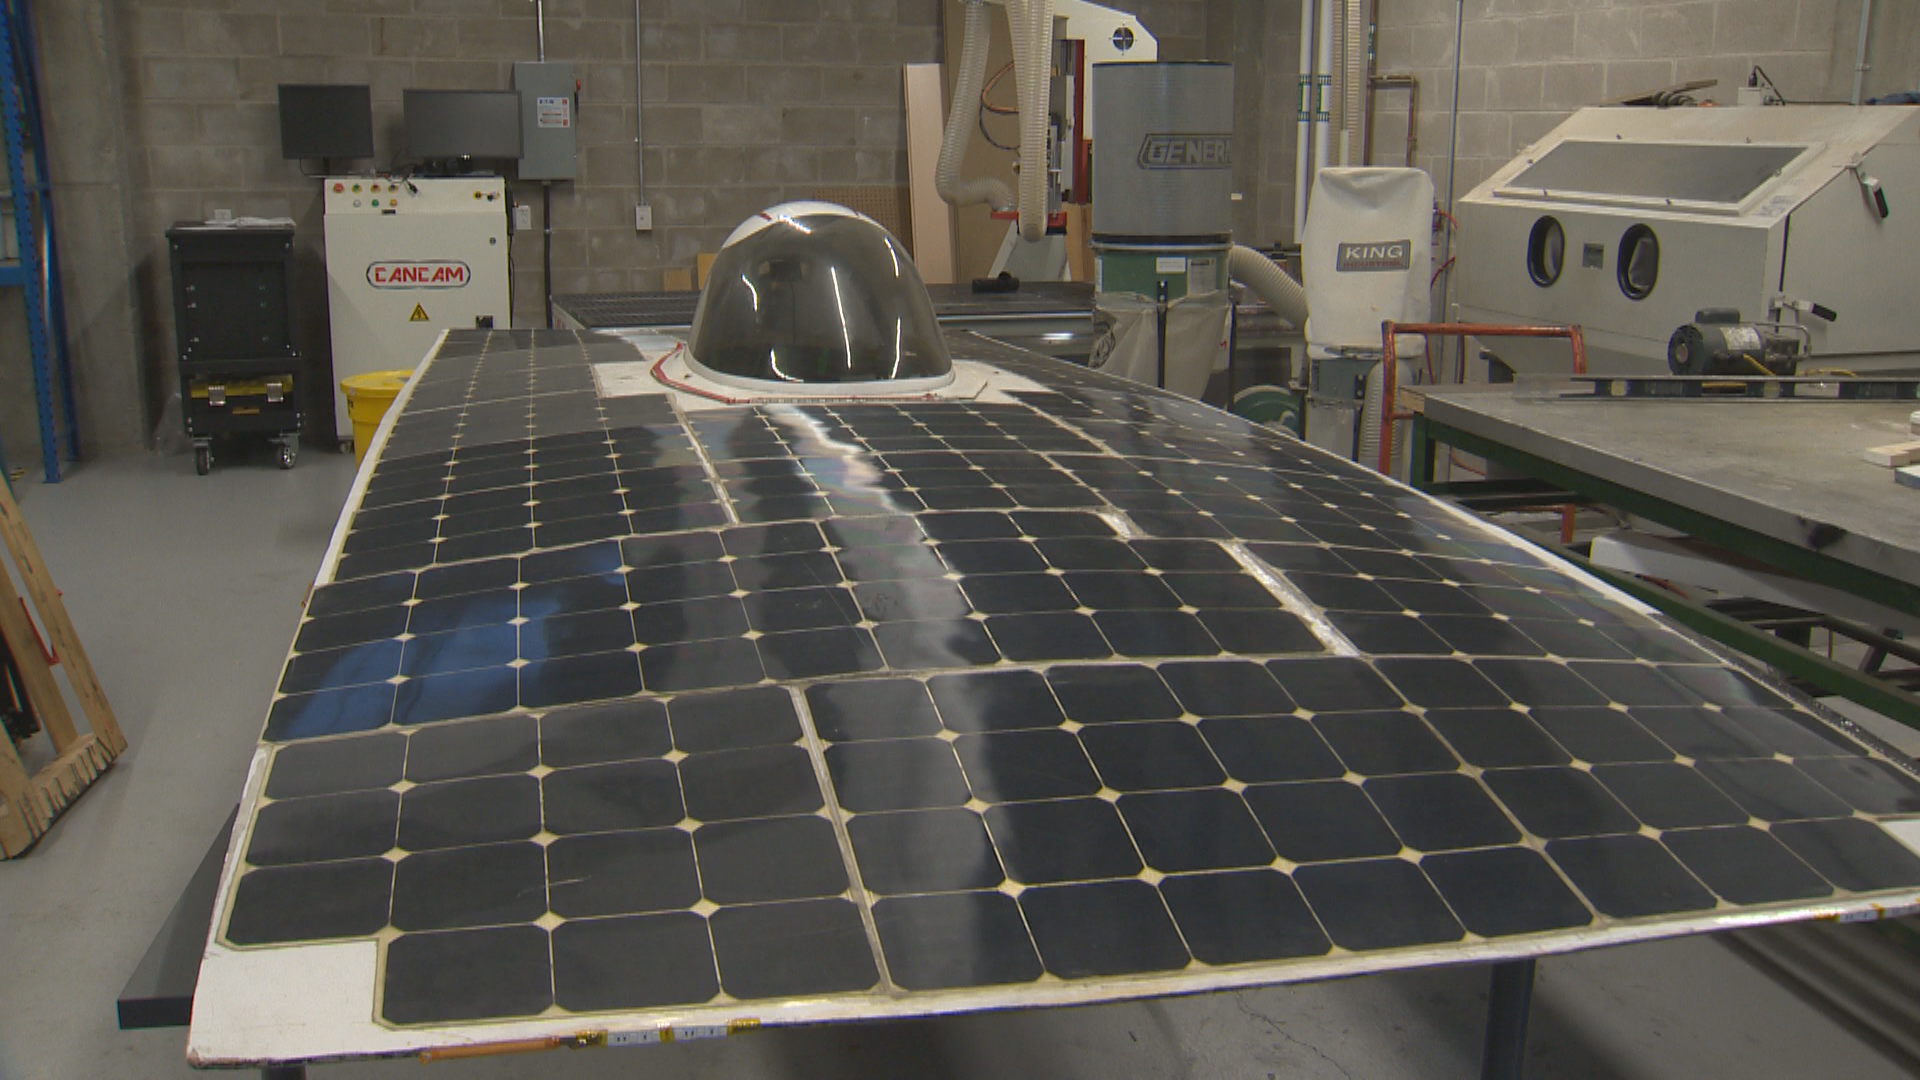 The solar panels are placed on top of the vehicle.